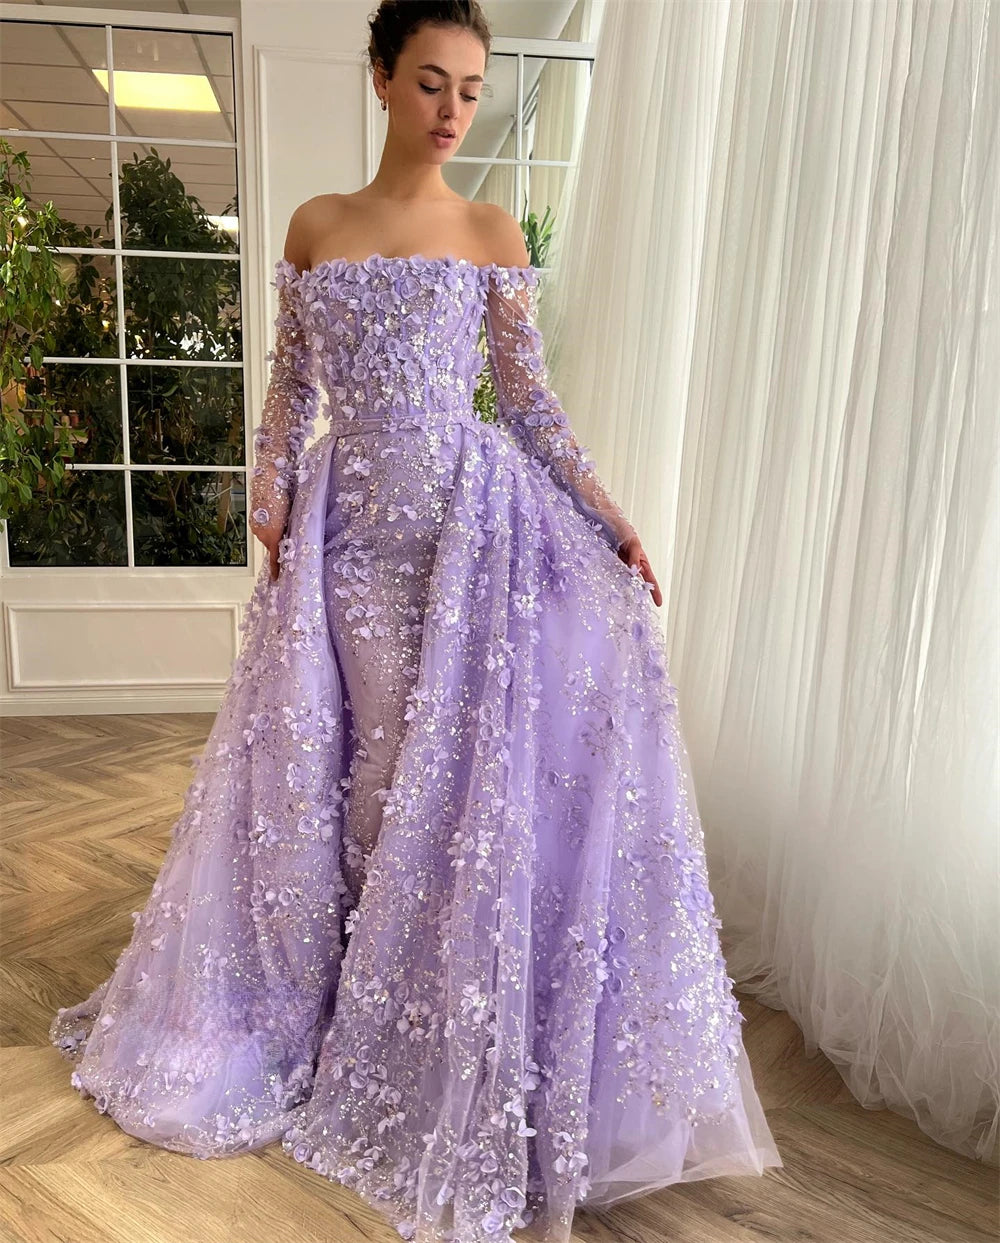 Exquisite Off the Shoulder Ball Gown Beading Sequined Flowers Tulle Bespoke Occasion Dresses Evening